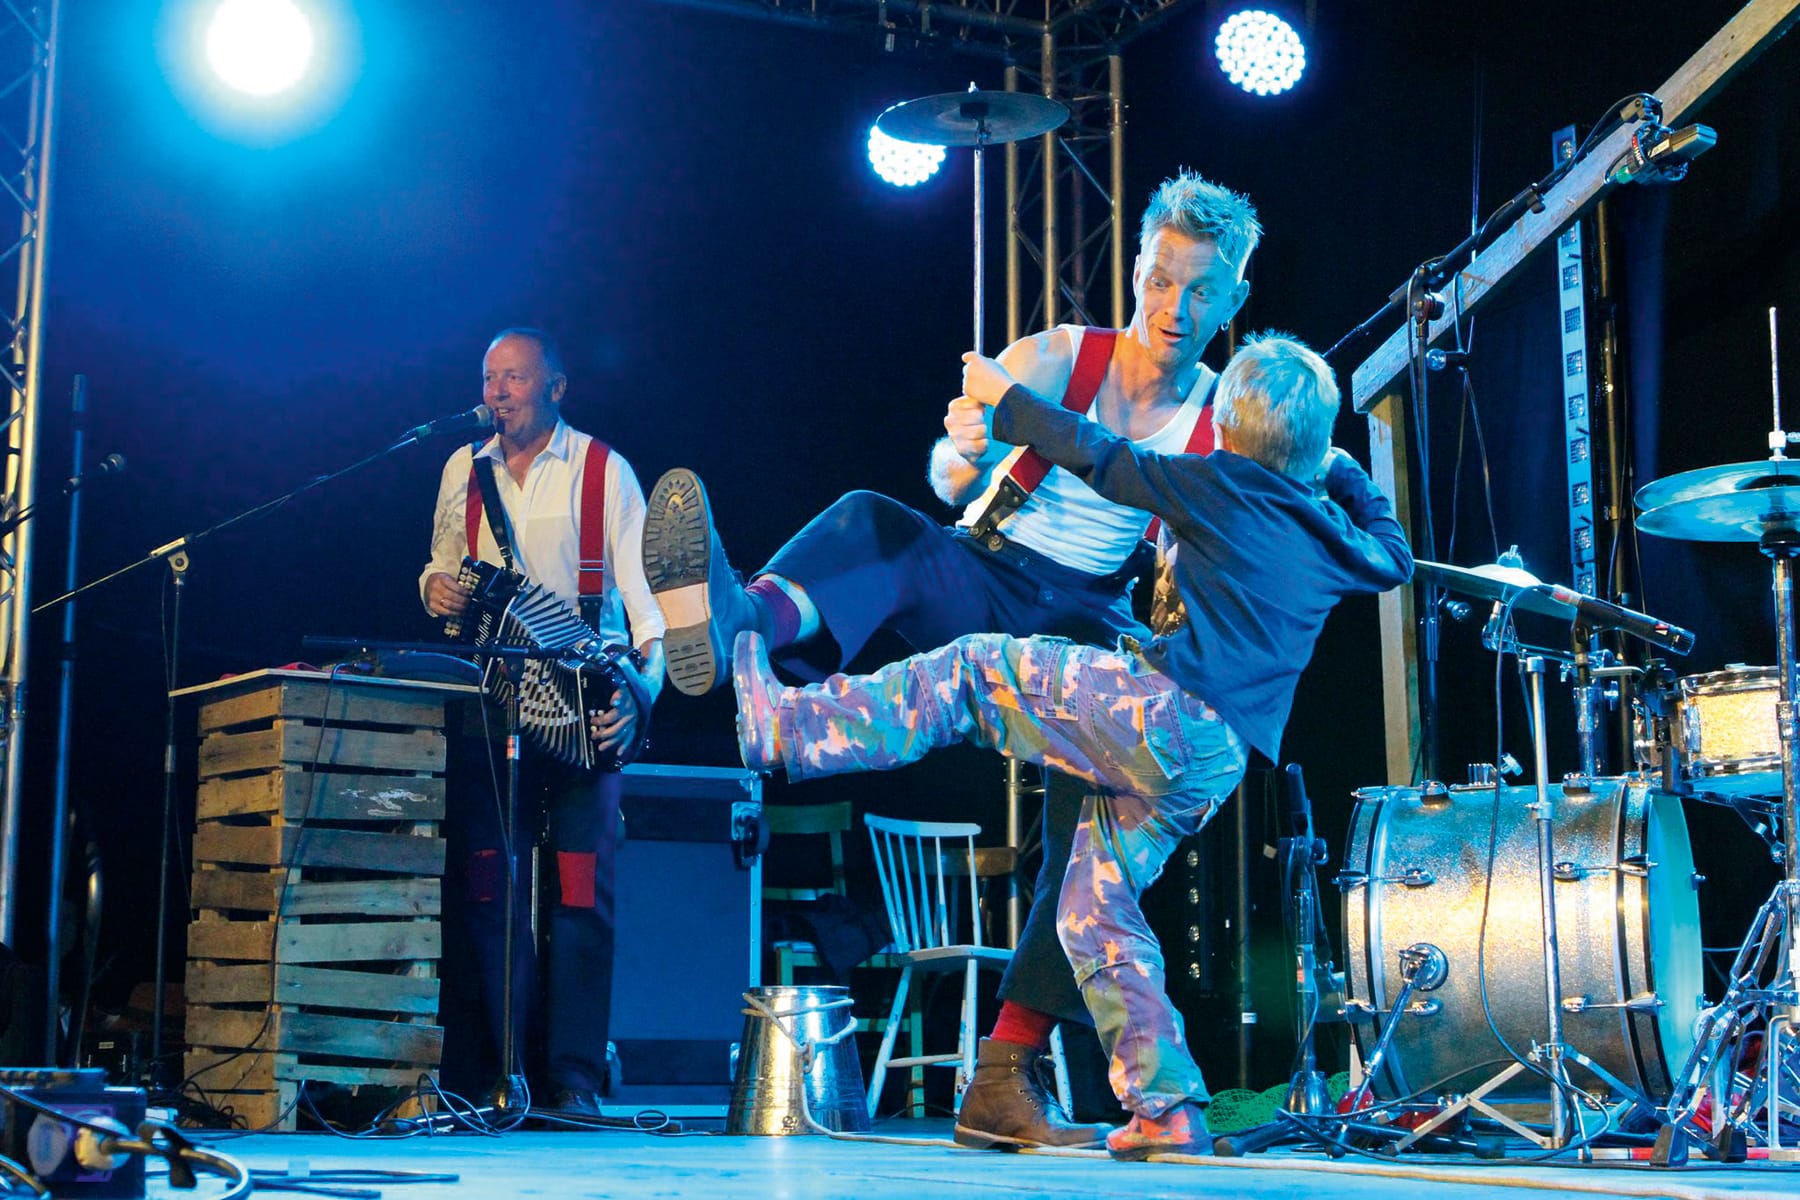 Photograph shows a performer on stage at Towersey Festival dancing with a young child